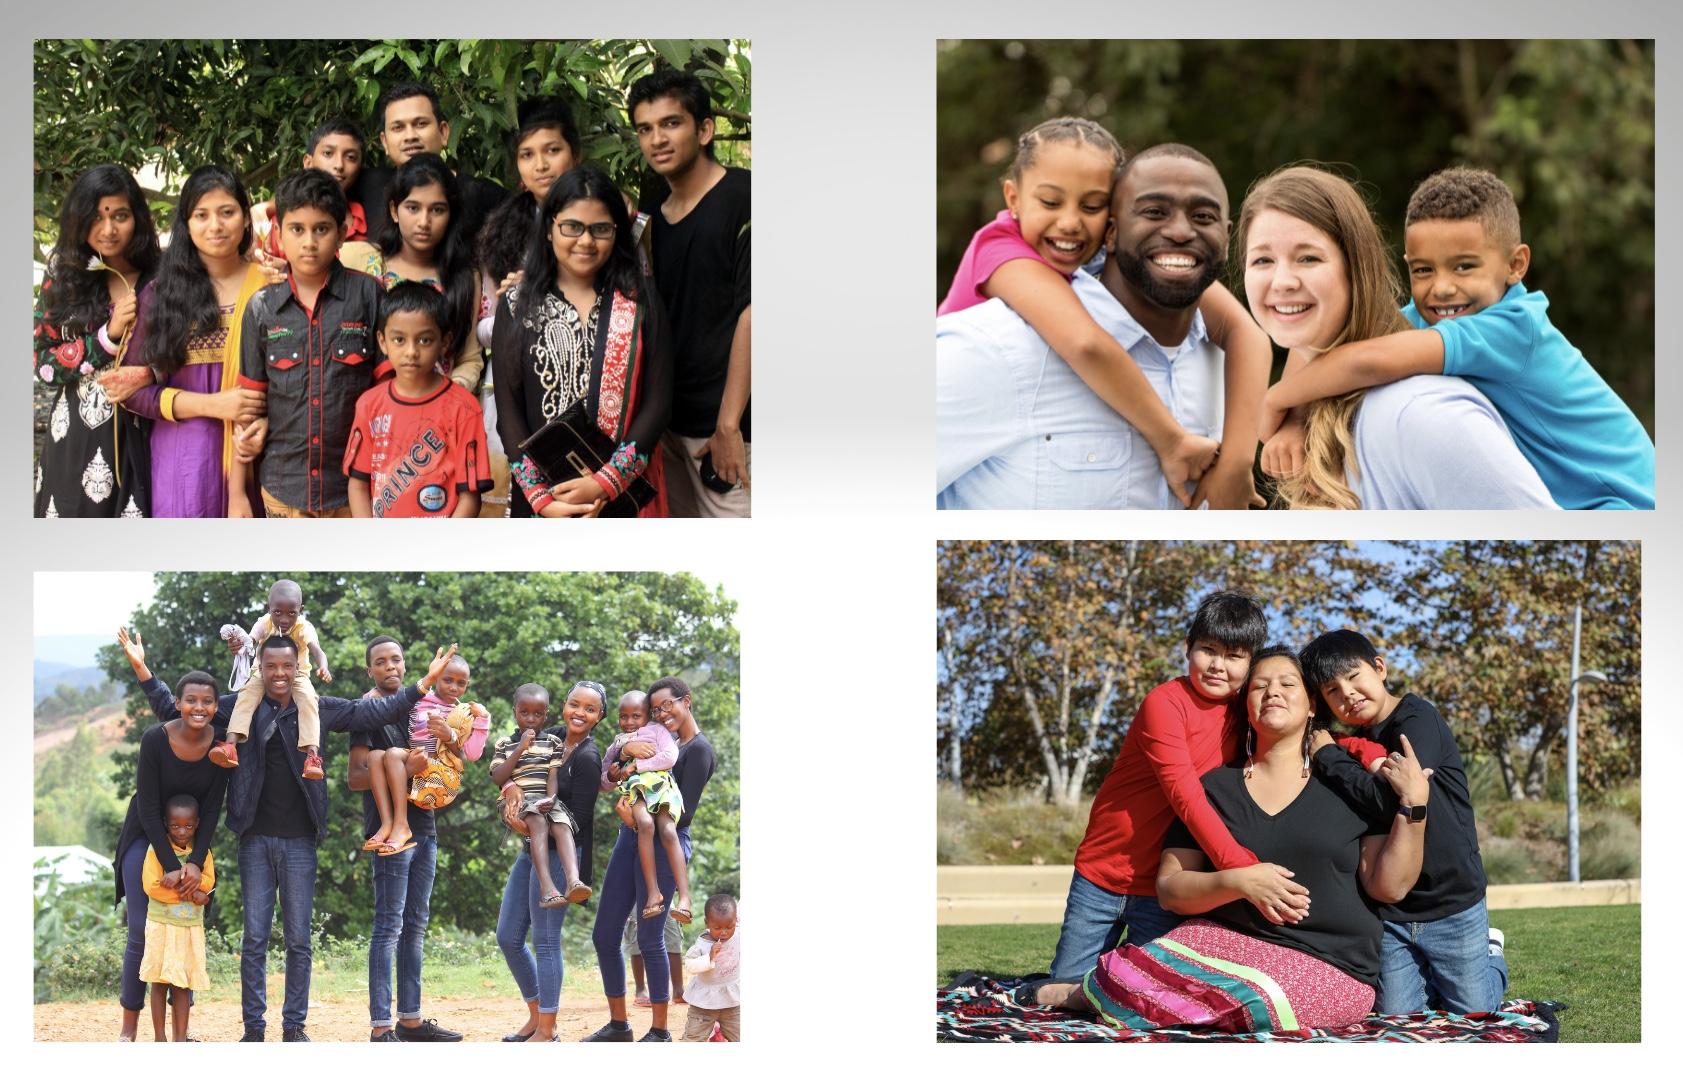 Four images of multicultural families